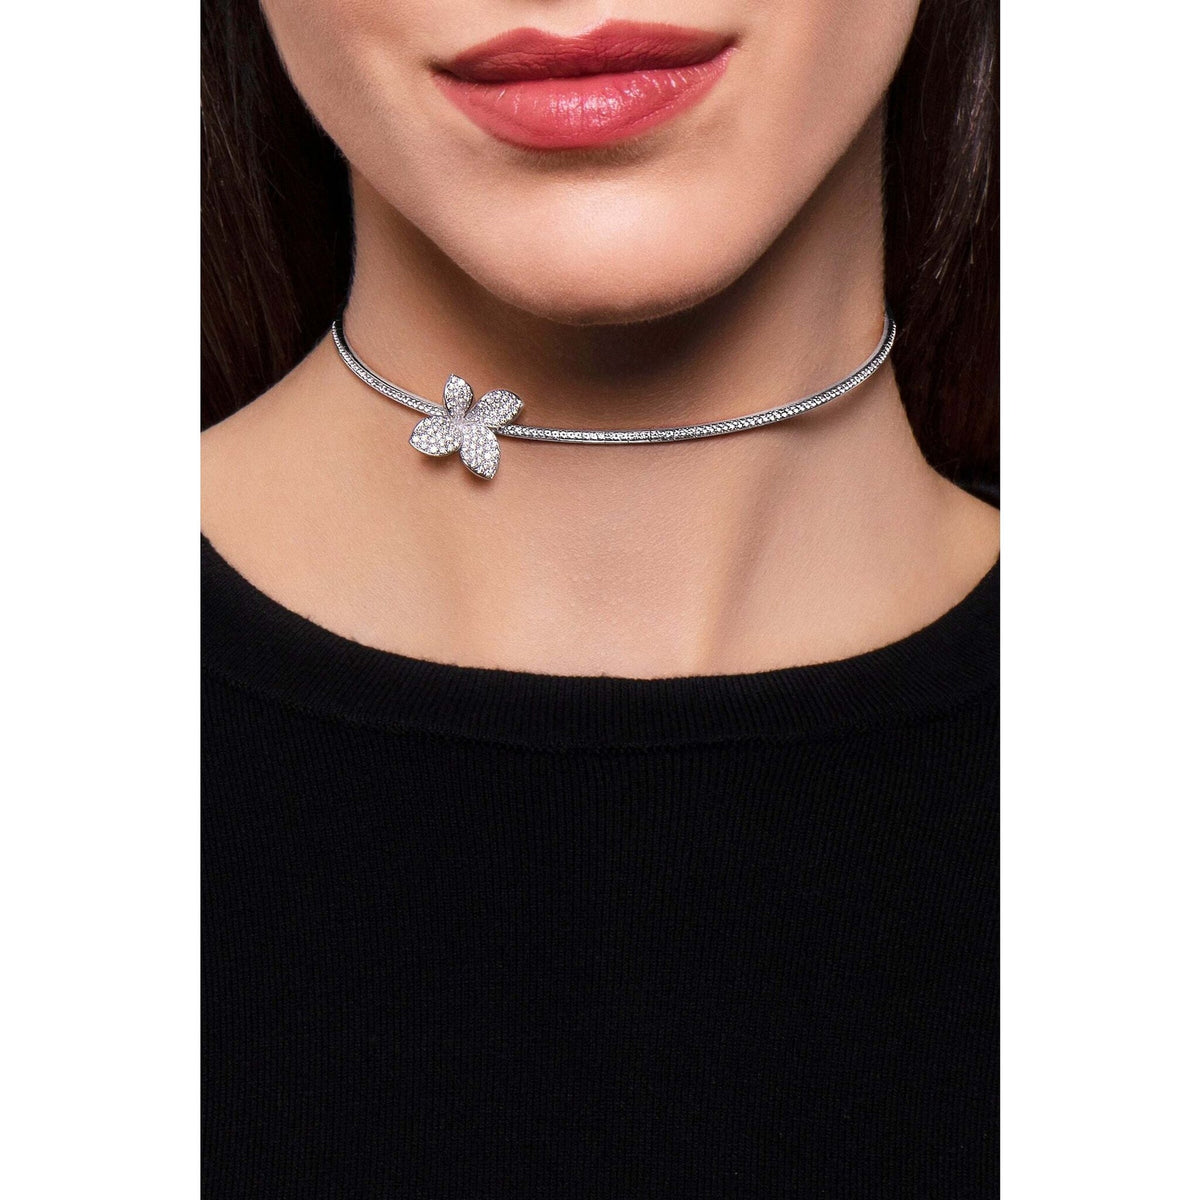 Are Choker Necklaces Still Popular? – Robinson's Jewelers